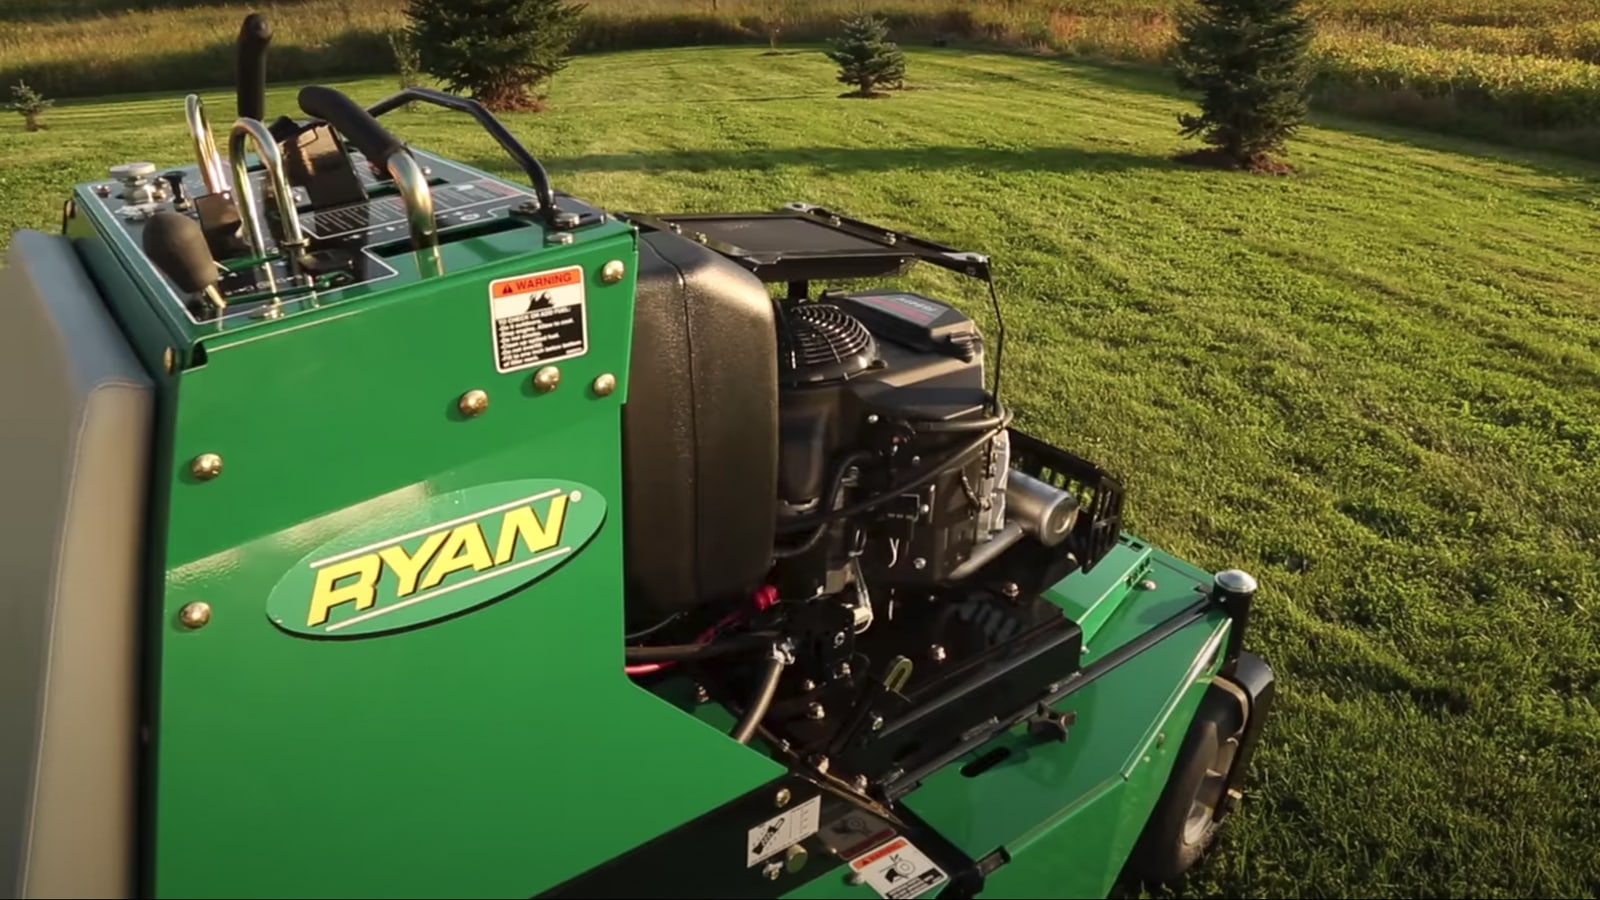 close-up photo of Ryan Lawnaire ZTS Stand-On Aerator